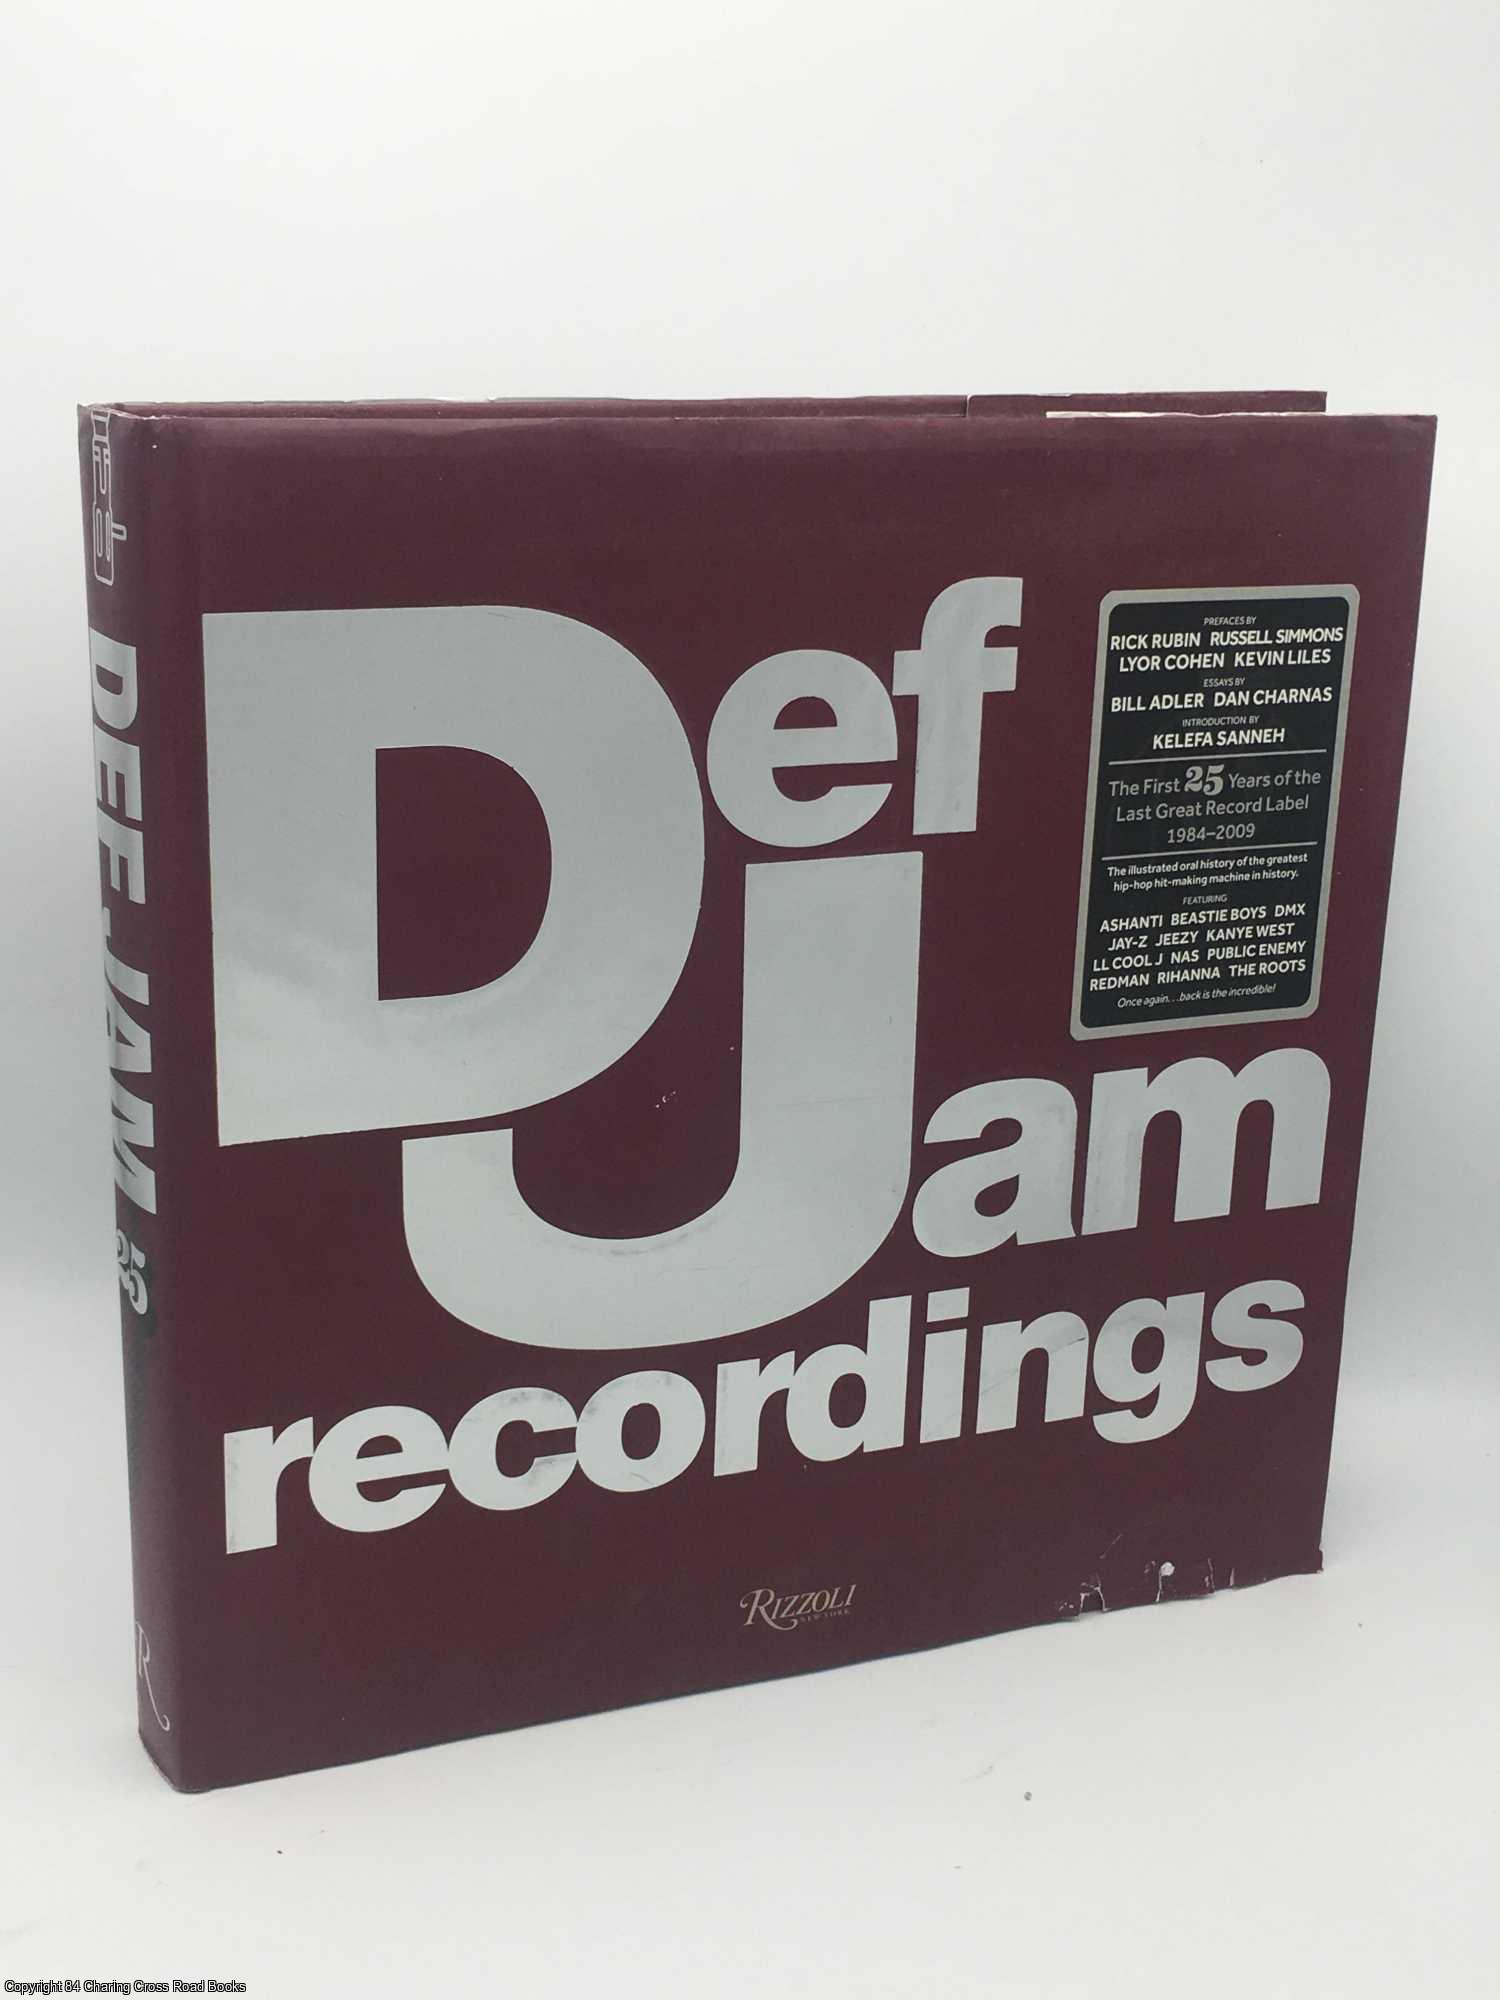 Jam, Def; Adler; Charnas - Def Jam Recordings: The First 25 Years of the Last Great Record Label